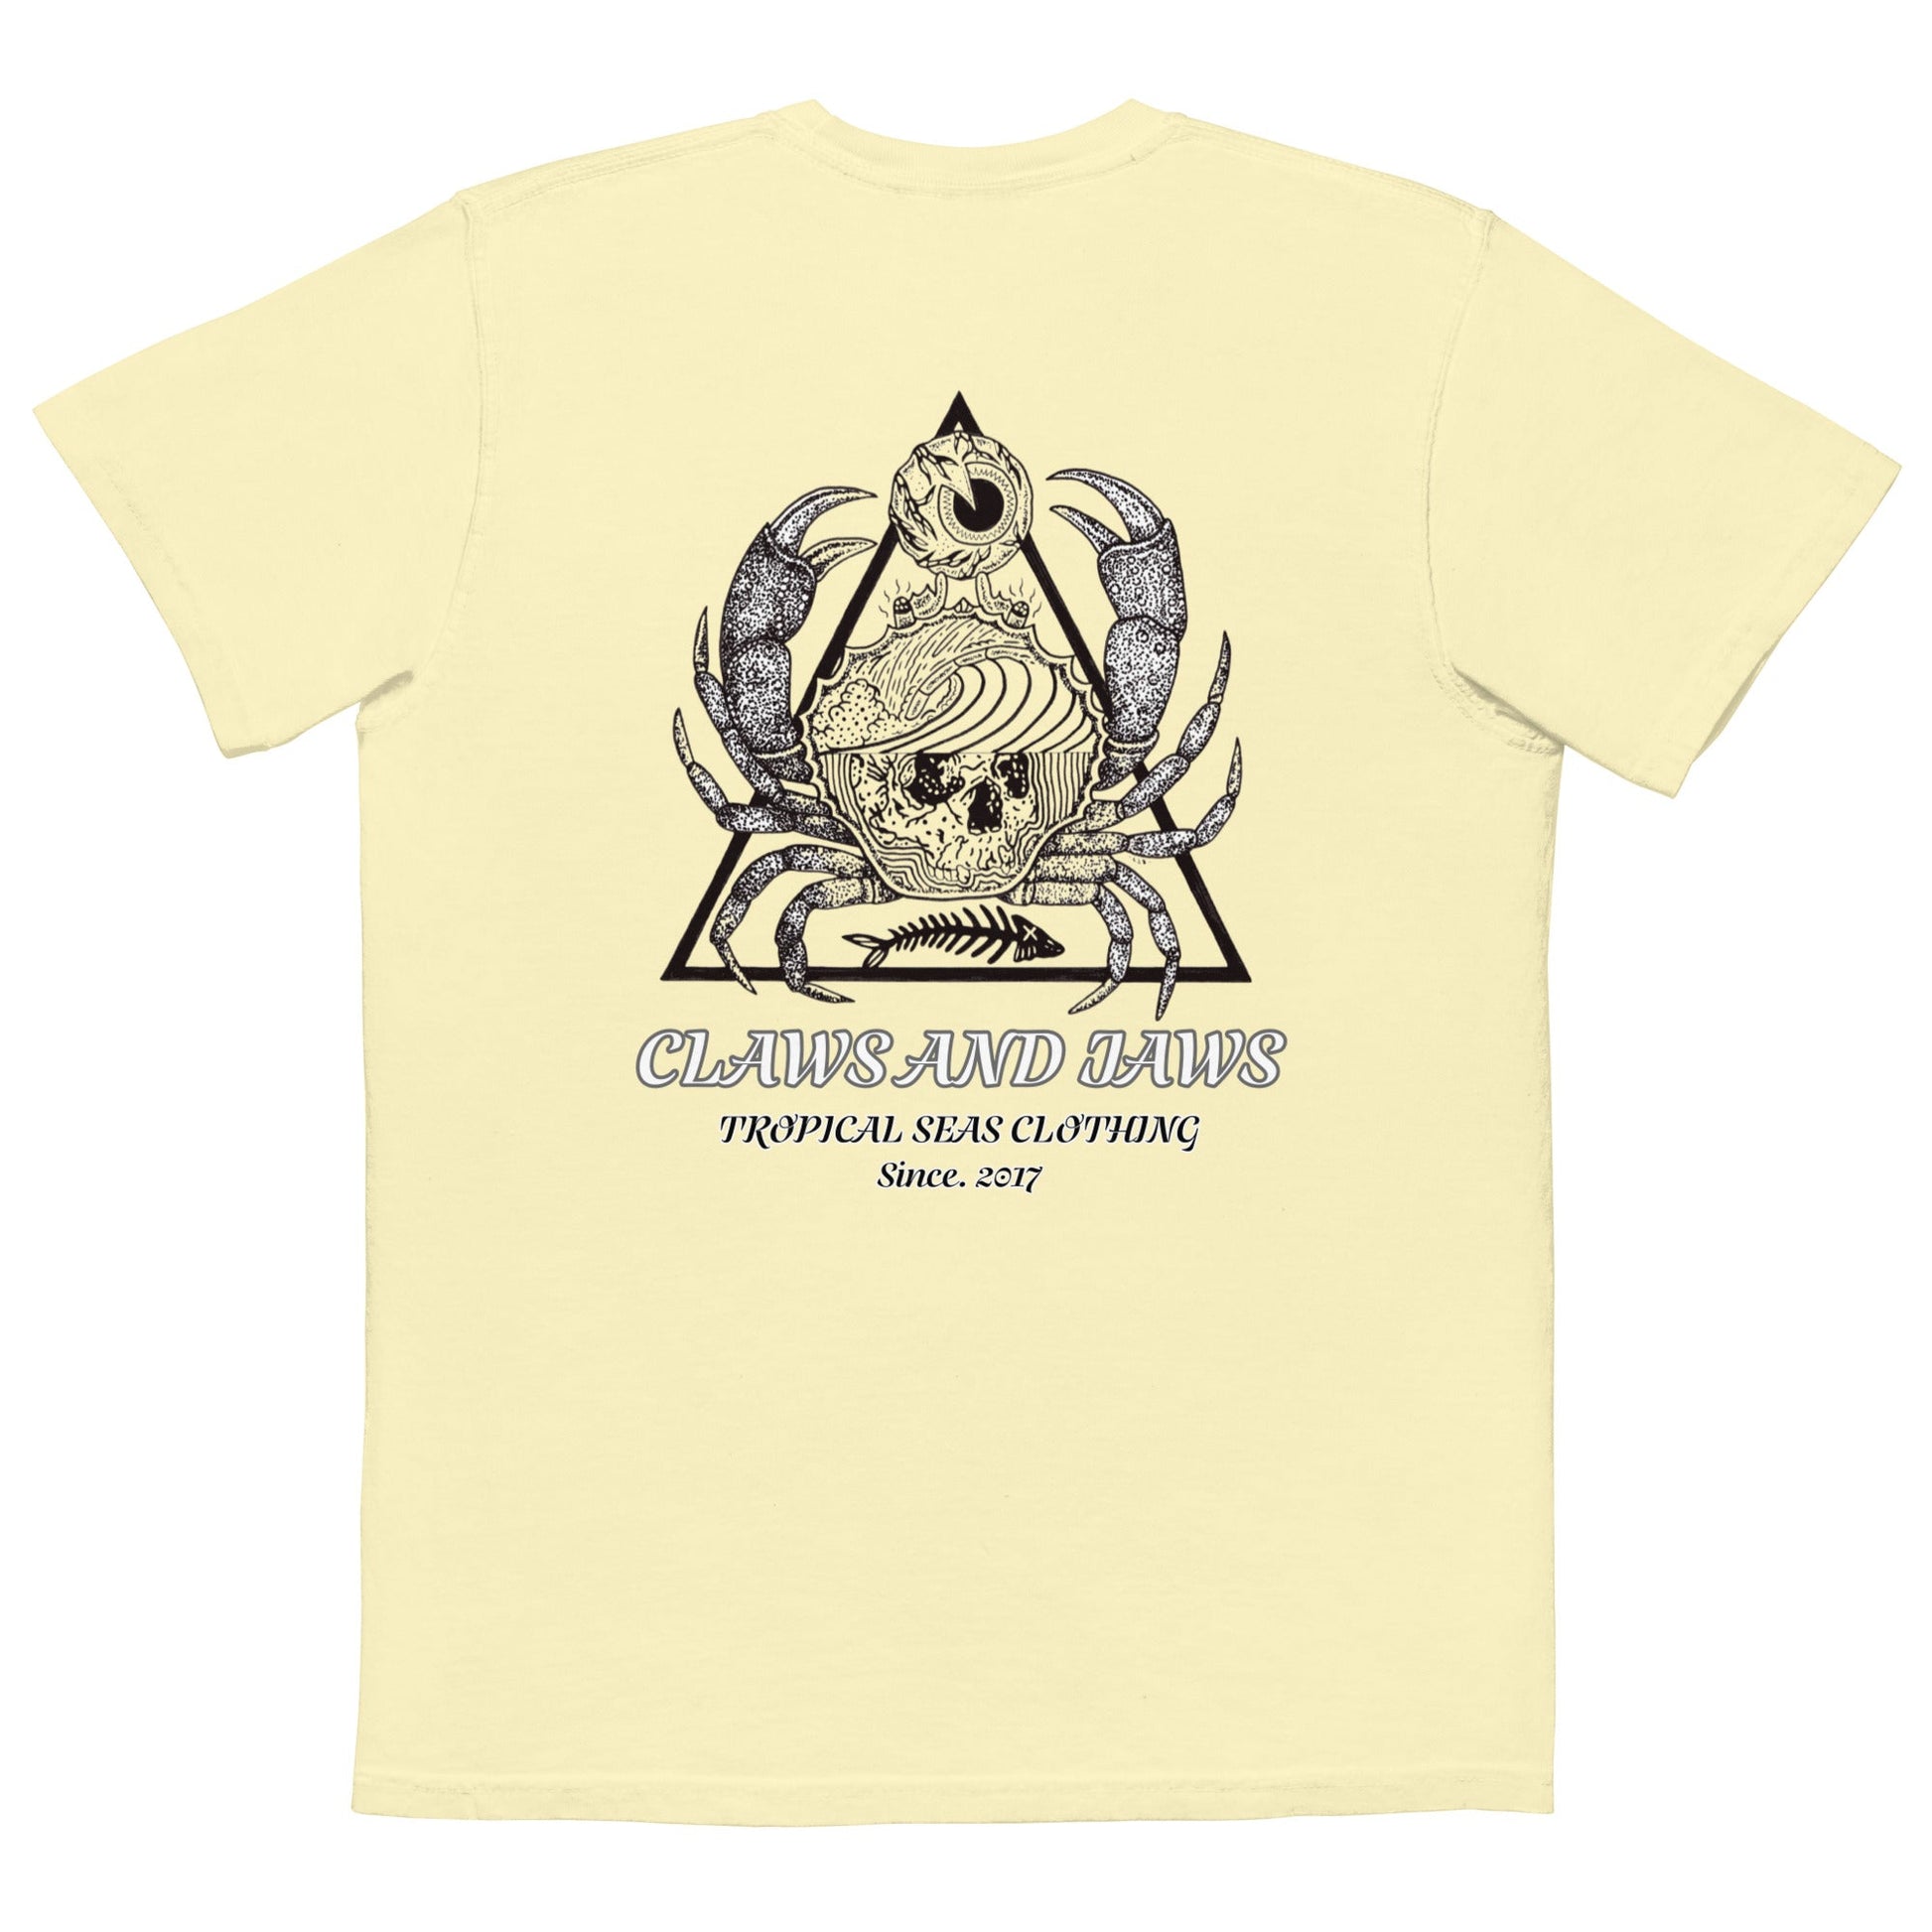 Men's Claws and Jaws Pocket T-shirt - Tropical Seas Clothing 